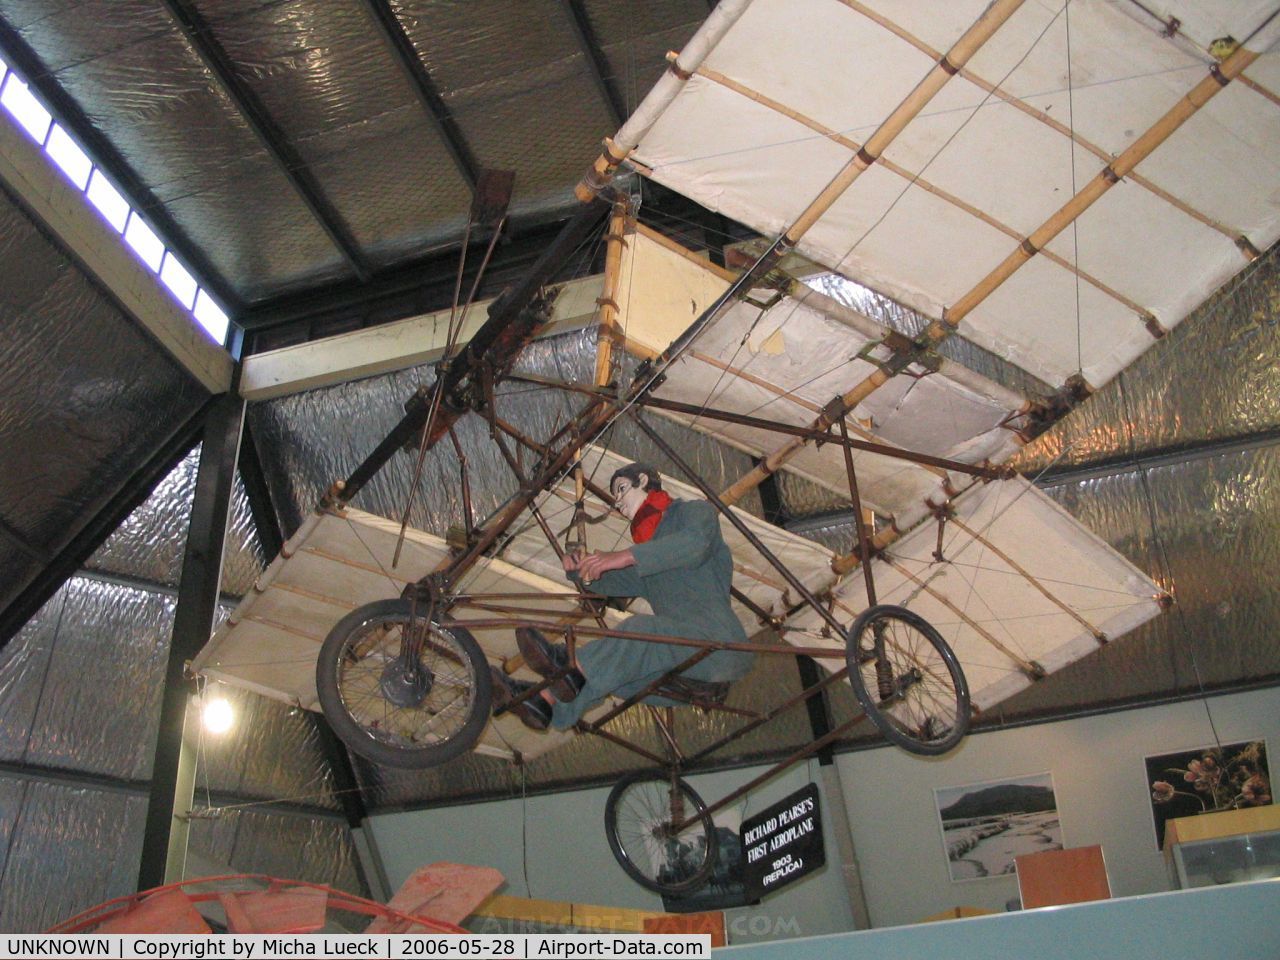 UNKNOWN, Miscellaneous Various C/N unknown, Richard Pearse's first (and most successful) aeroplane, built between 1898 and 1903 (replica). Preserved at the Museum of Transport and Technology (MOTAT) in Auckland, New Zealand.